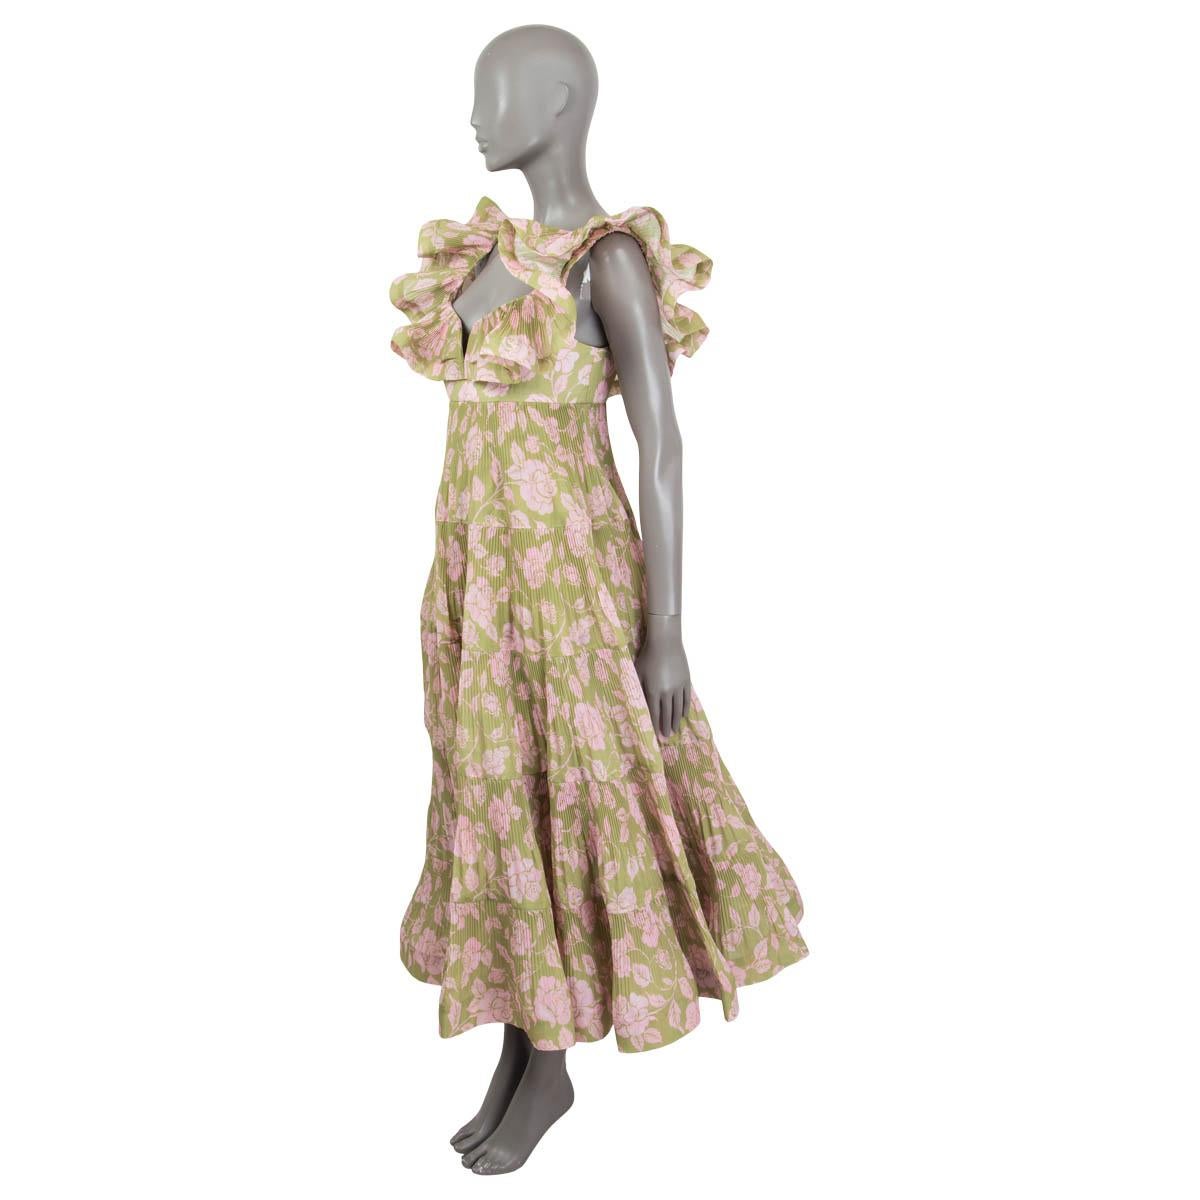 100% authentic Zimmermann The Lovestruck pleated ruffle maxi gown in olive green and light pink polyester (100%). Opens with a zipper on the back. Lined in green cotton (100%). Has been worn and is in excellent condition. 

Resort